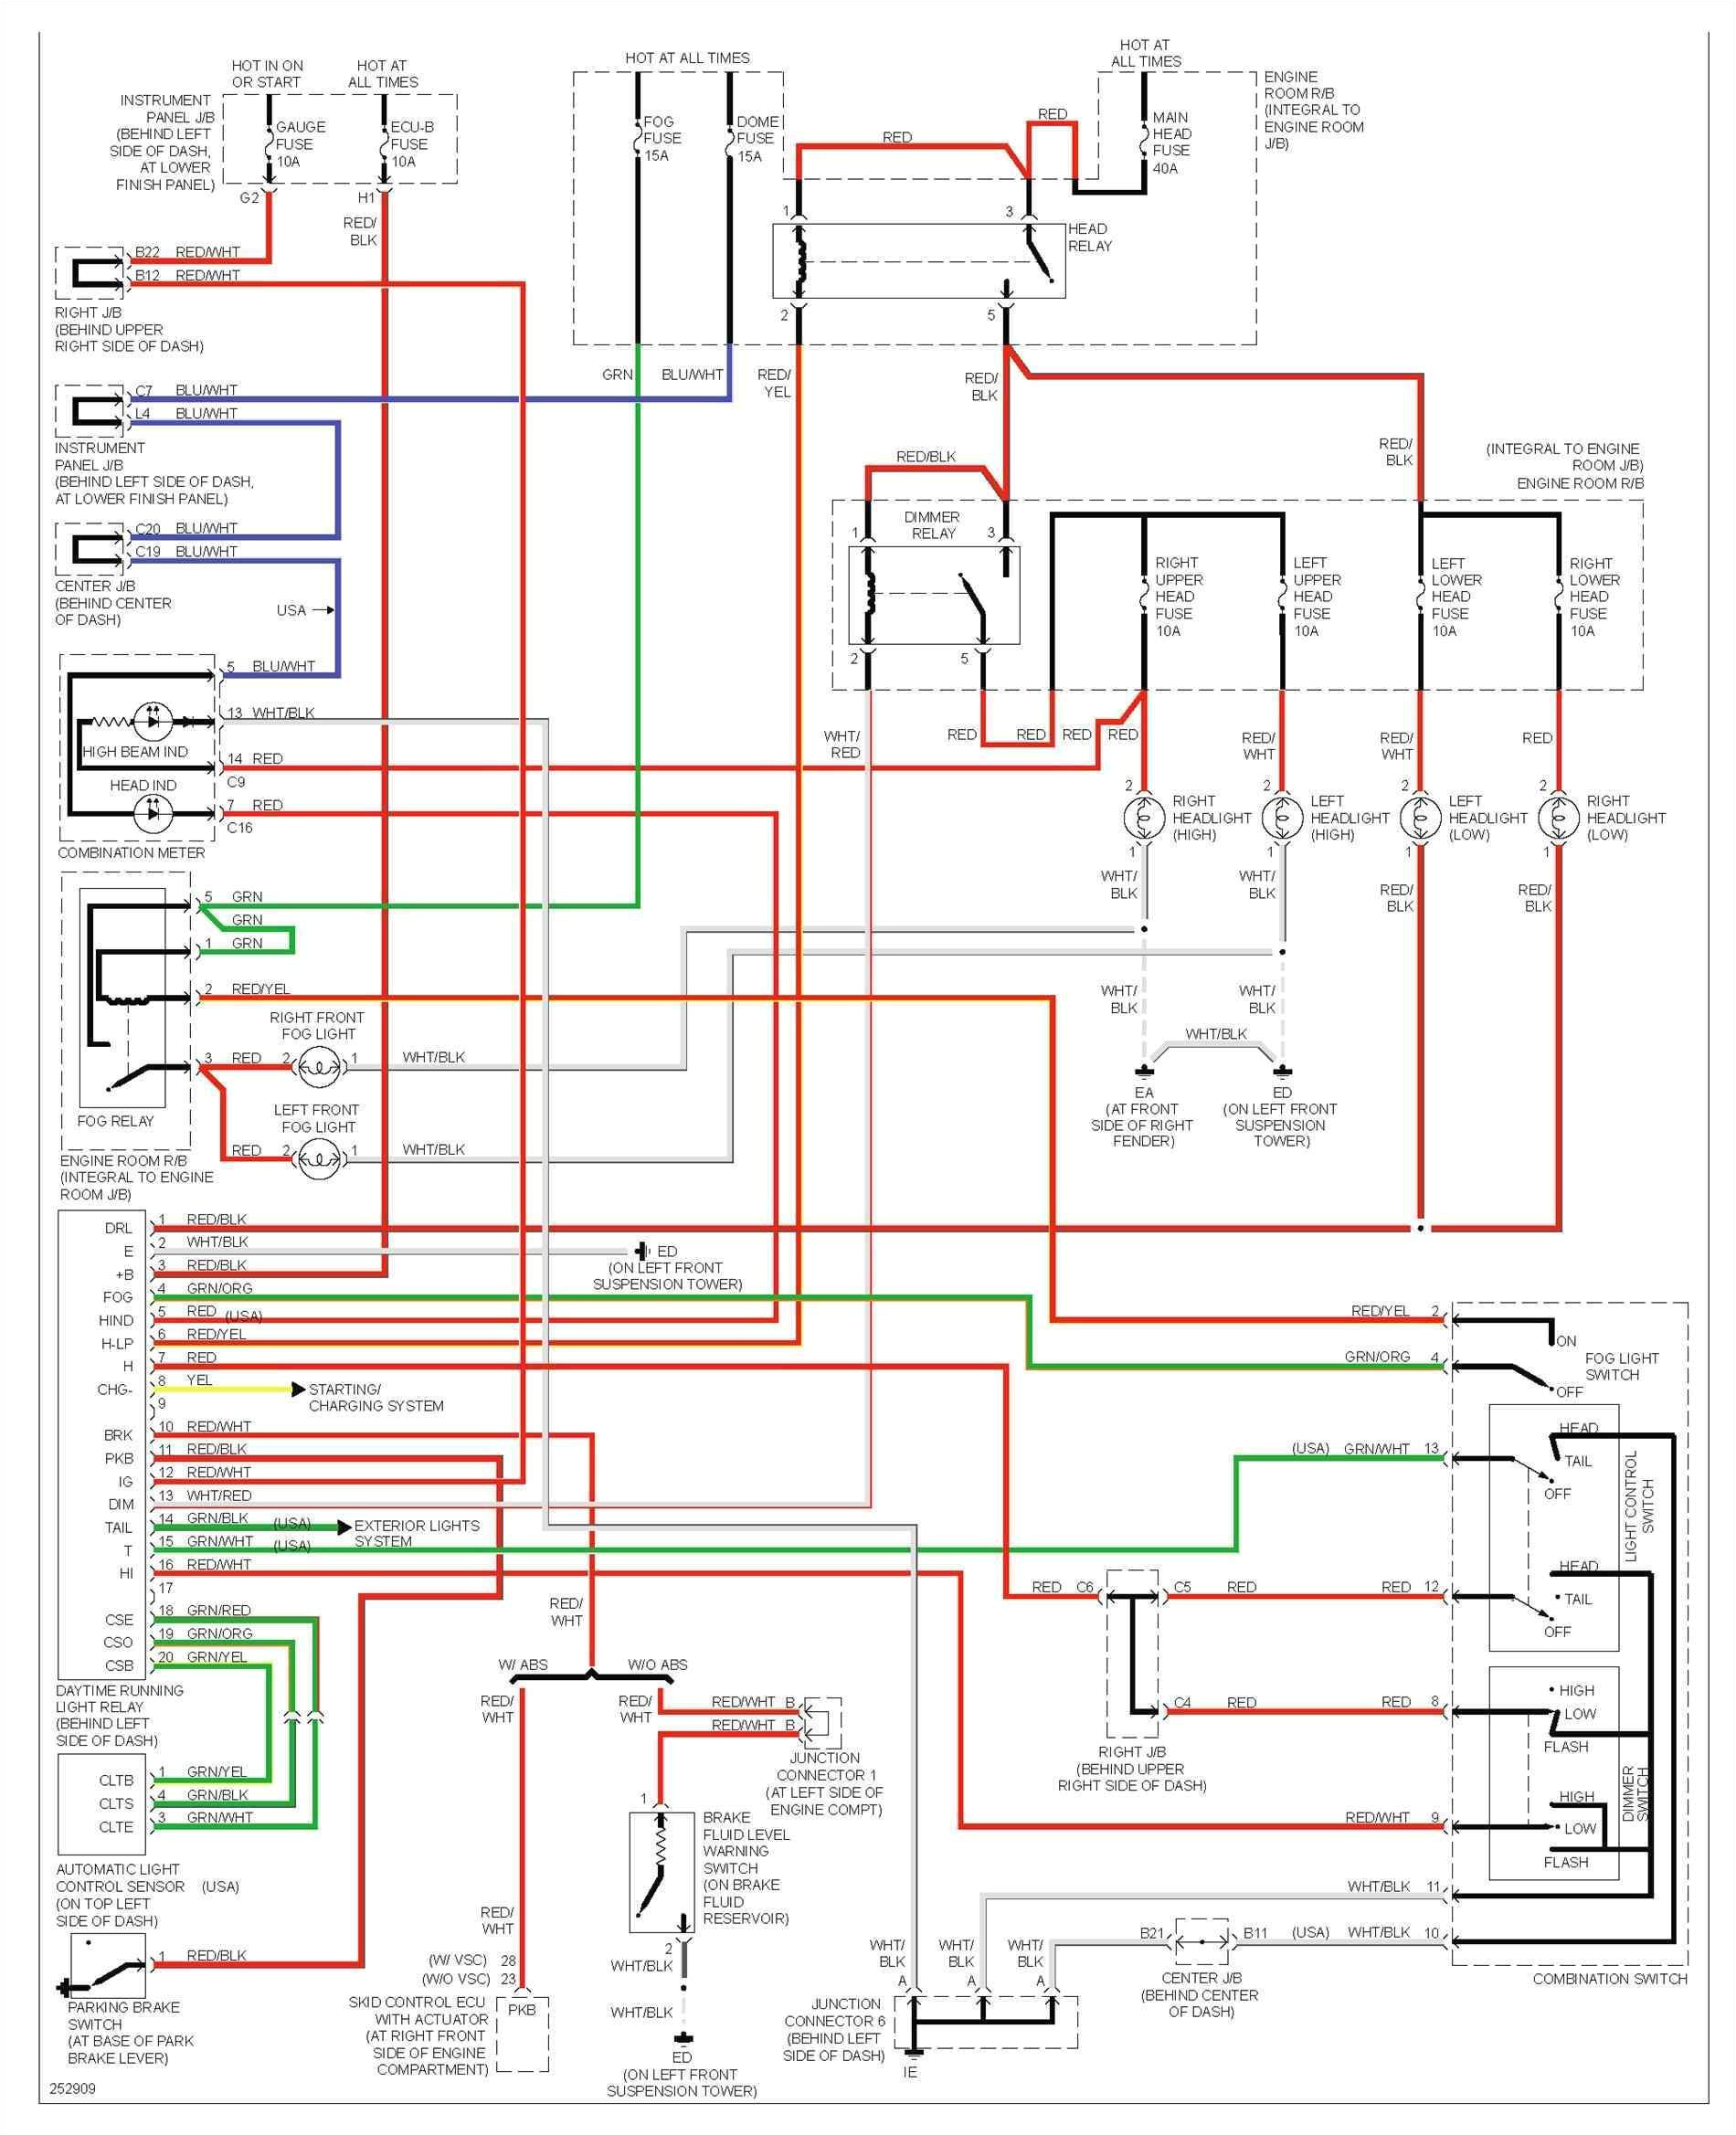 connection diagram olympian generator wiring diagrams konsult olympian generator wiring diagram 4001e olympian generator control wiring